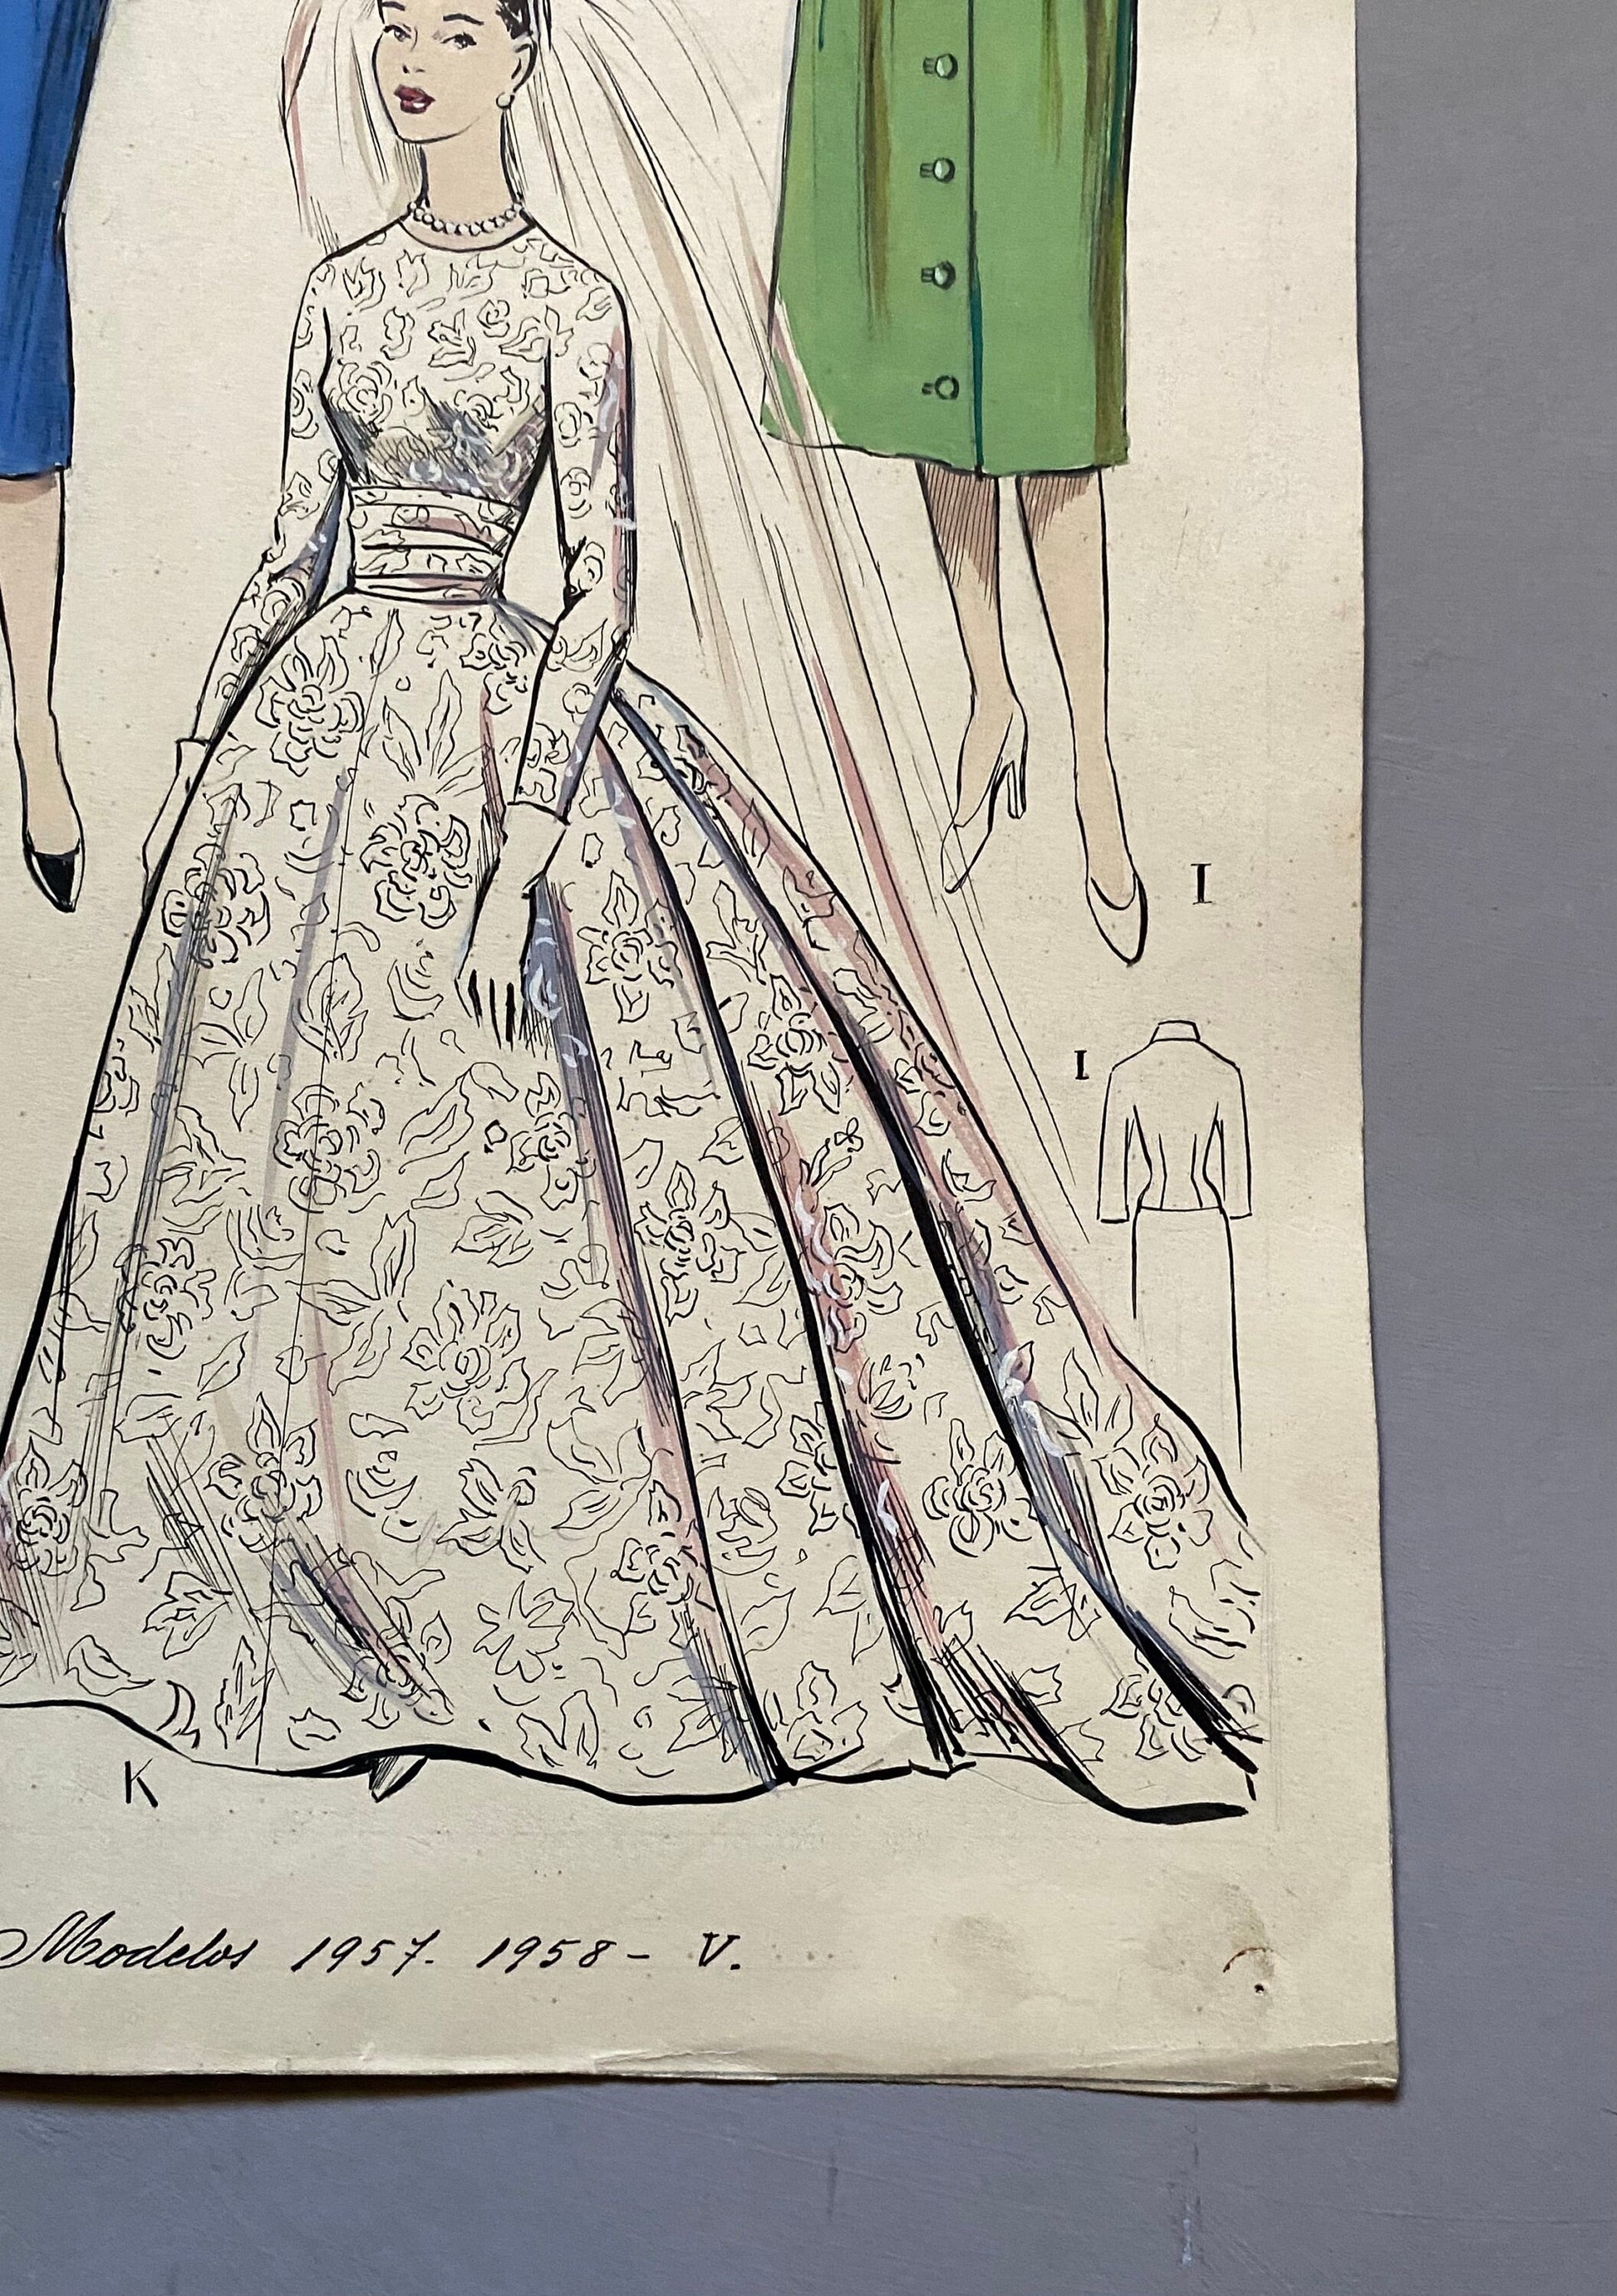 A Large Hand Drawn and Hand Painted Fashion Illustration. Spanish. Barcelona. 1957 - 58. Size: 52 x 41 cms.